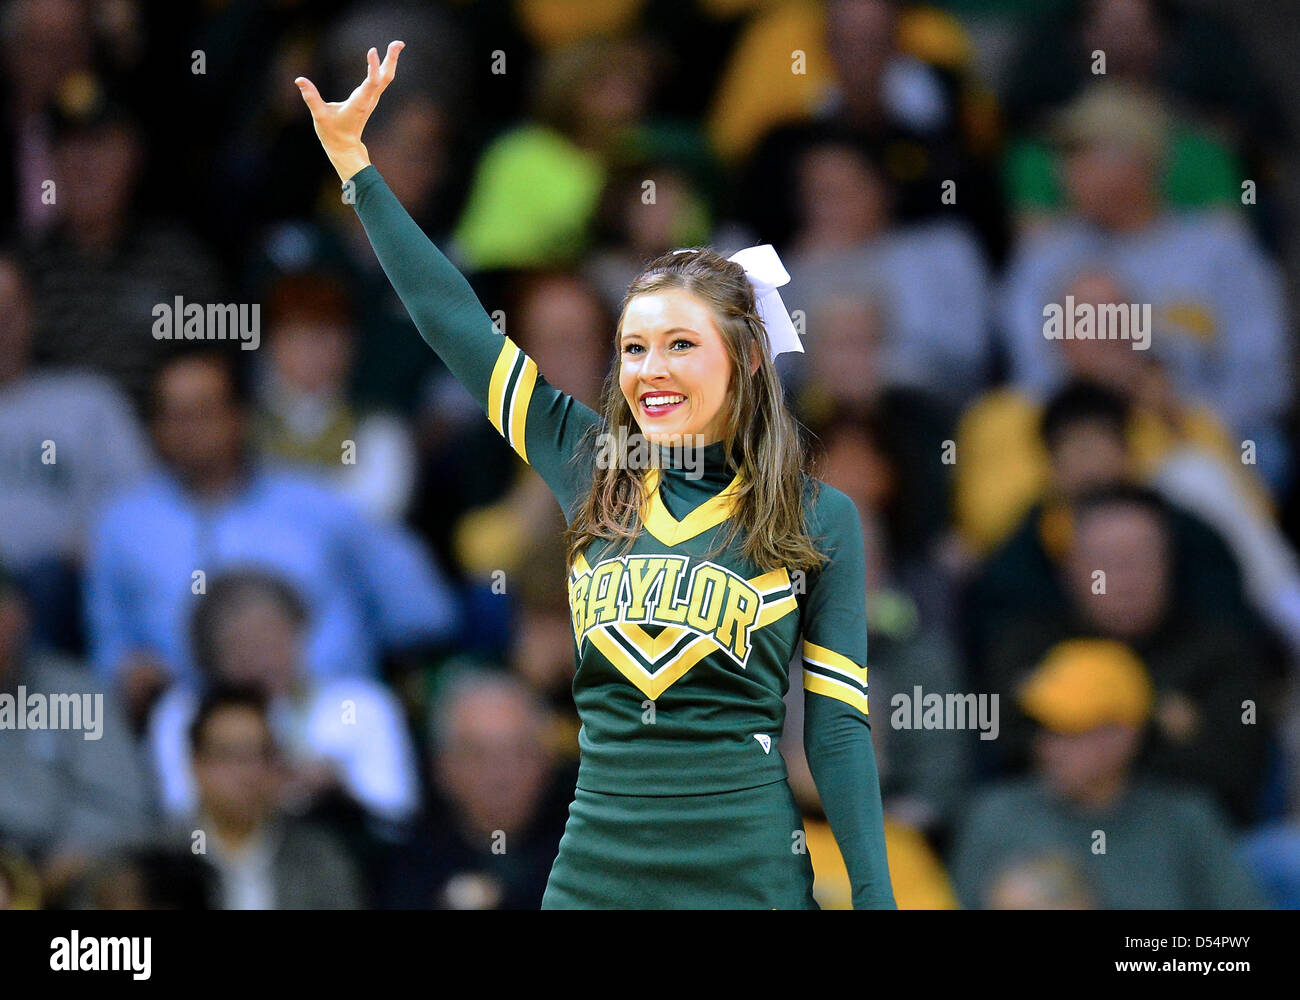 March 24, 2013 - Waco, TX, U.S - March 24, 2013..Baylor cheerleader during first round of NCAA Women's Basketball regional tournament at Ferrell Center in Waco, TX. Baylor defeat Prairie A&M 82-40 to advance to the second round. Stock Photo